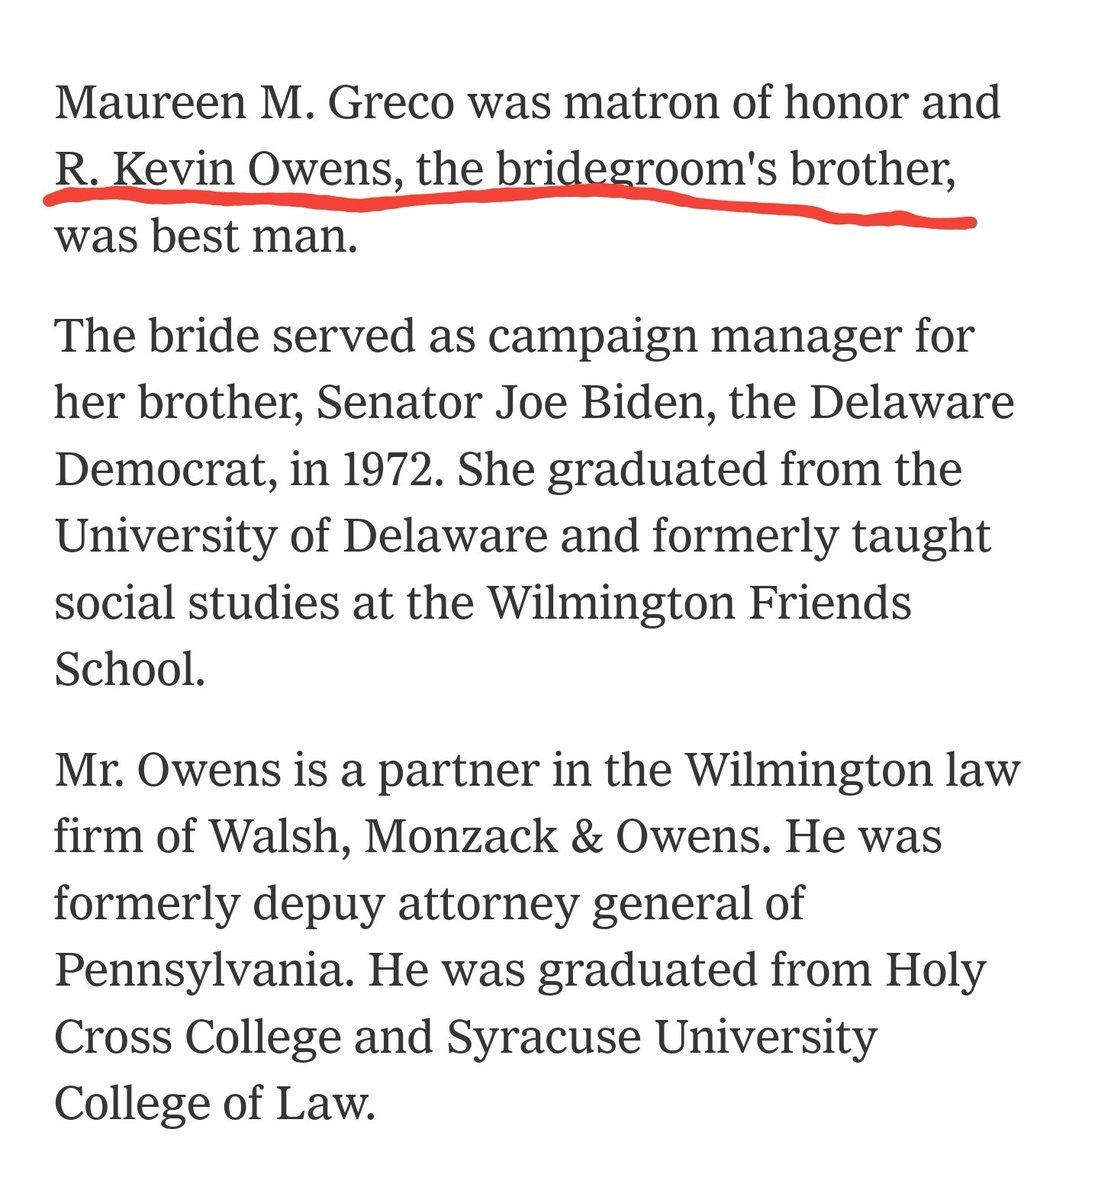 @Sunchasegirl @nomandatesco @Smuggzley1776 R. Kevin Owens was bridegroom's brother as best man, at Valerie Biden's wedding in 1975. Soutce NyTimes: nytimes.com/1975/10/12/arc…